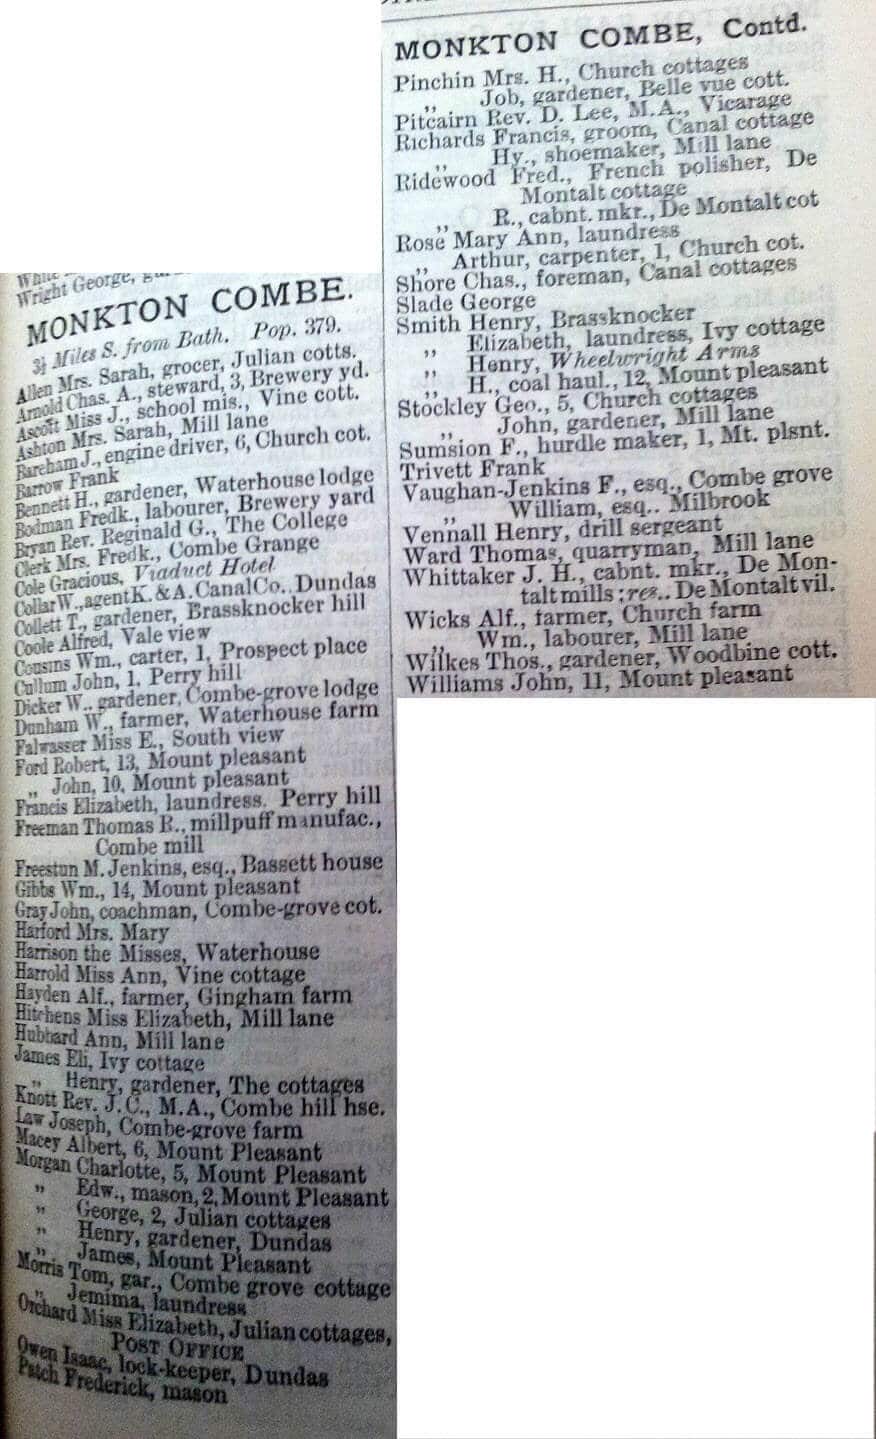 Post Office Directory for Monkton Combe